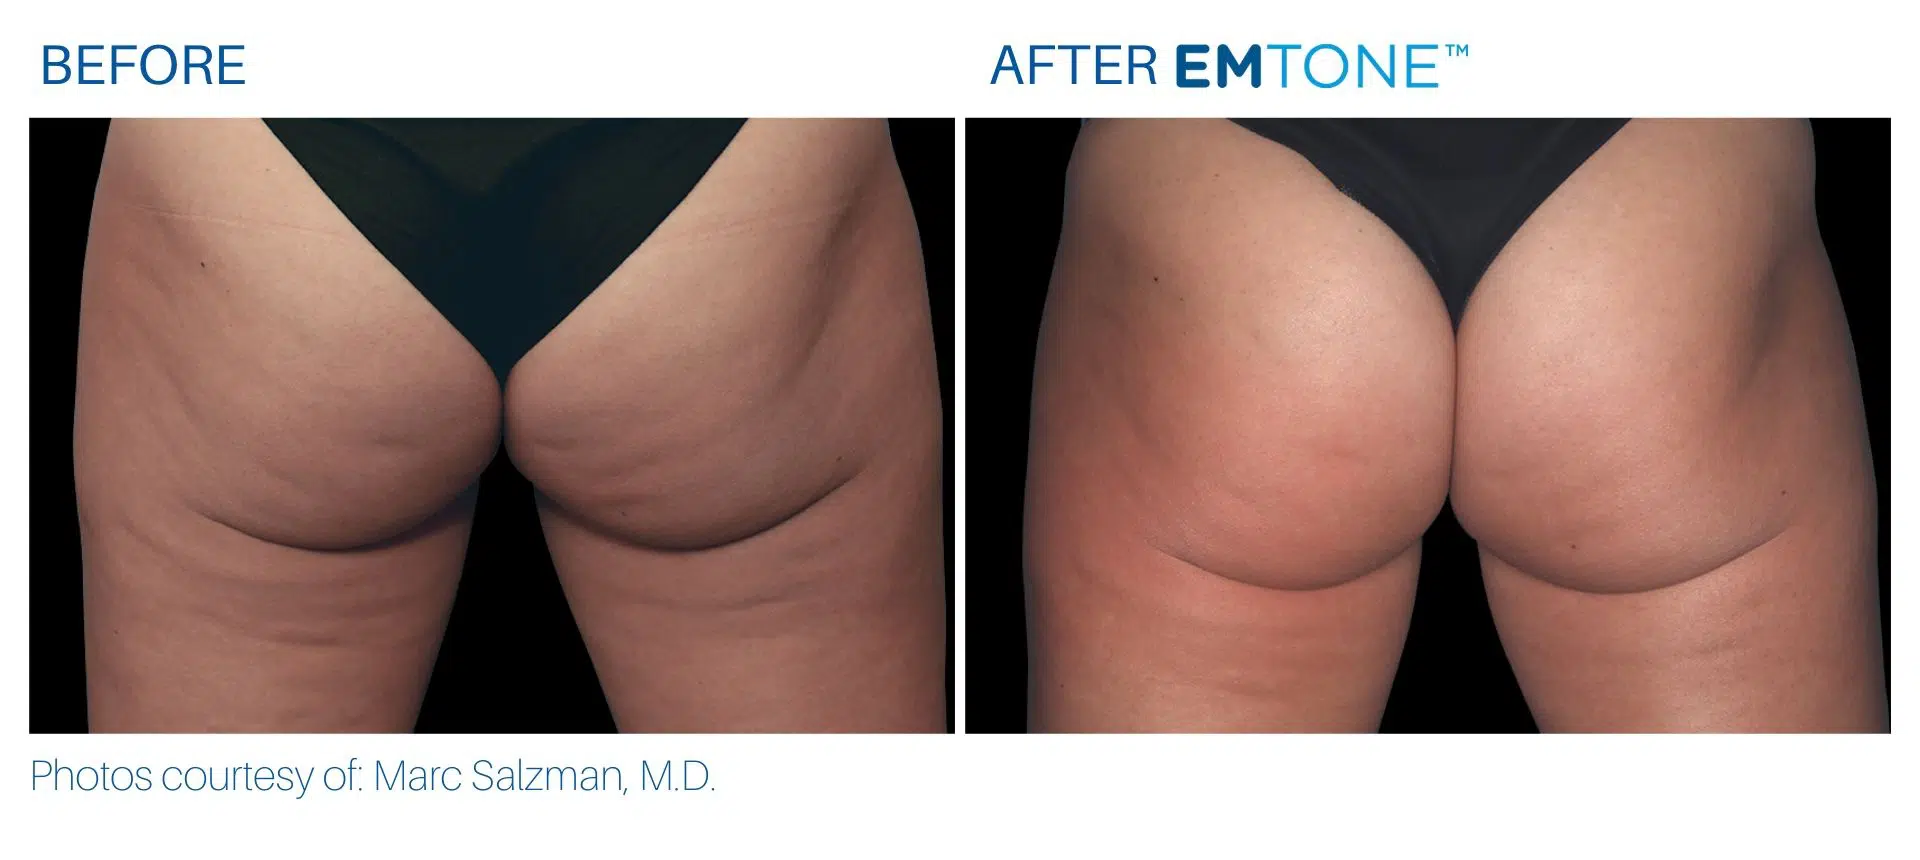 Emtone buttocks before and after result BodyMorphMD.